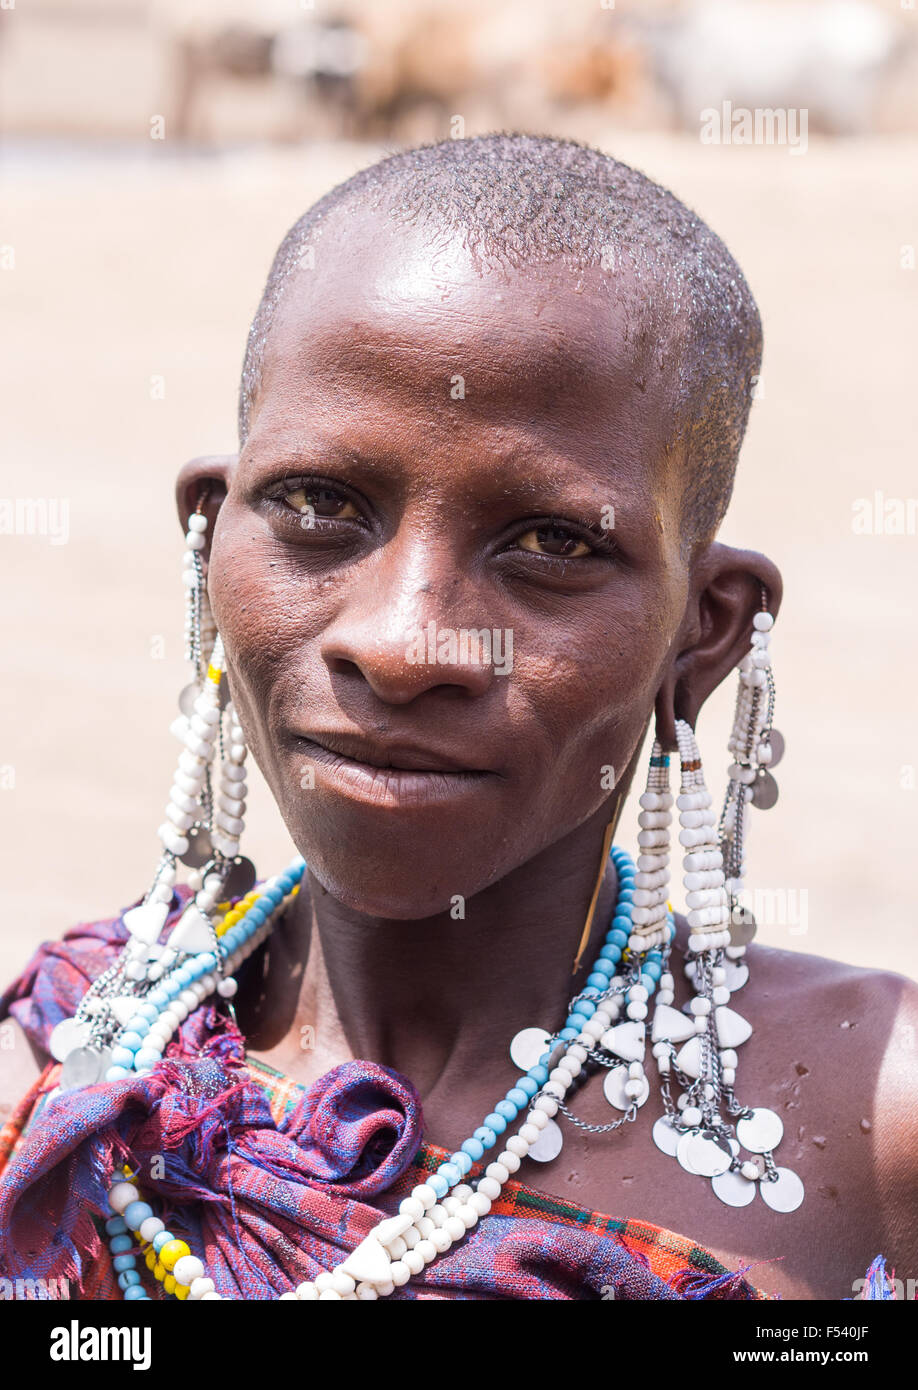 Maasai woman in Arusha region, Tanzania, Africa, selling souvenirs - mainly handmade jewelry - to foreign visitors. Stock Photo